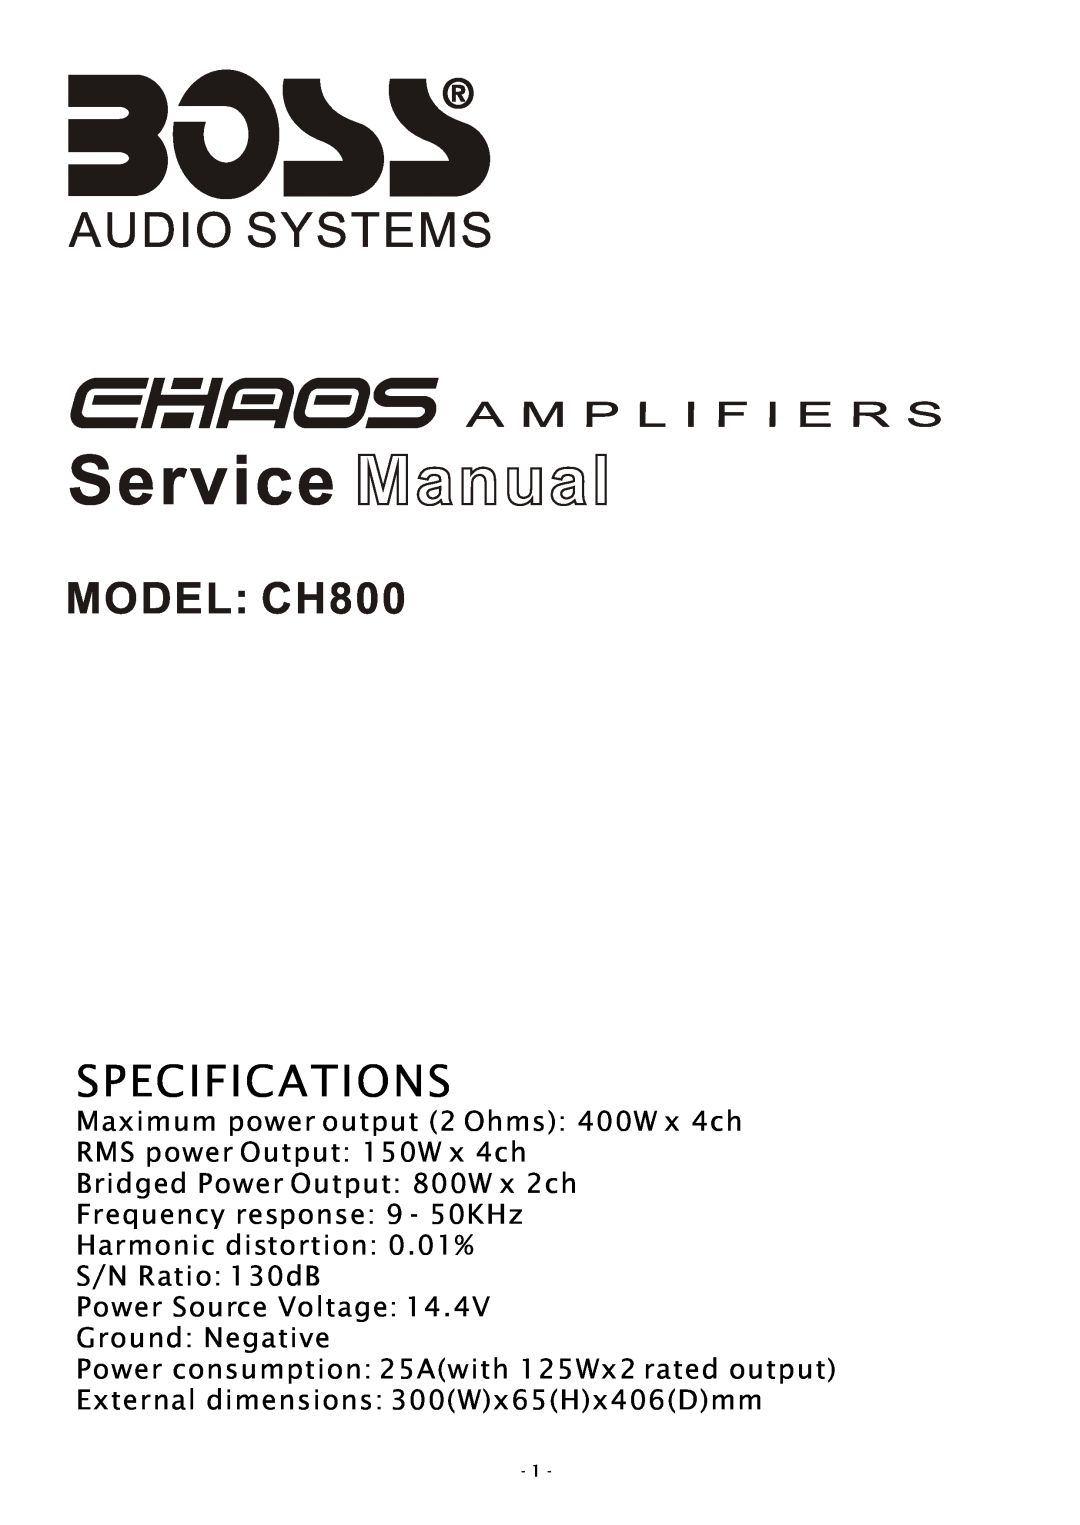 Boss Audio Systems specifications MODEL CH800, Specifications, External dimensions 300Wx65Hx406Dmm 